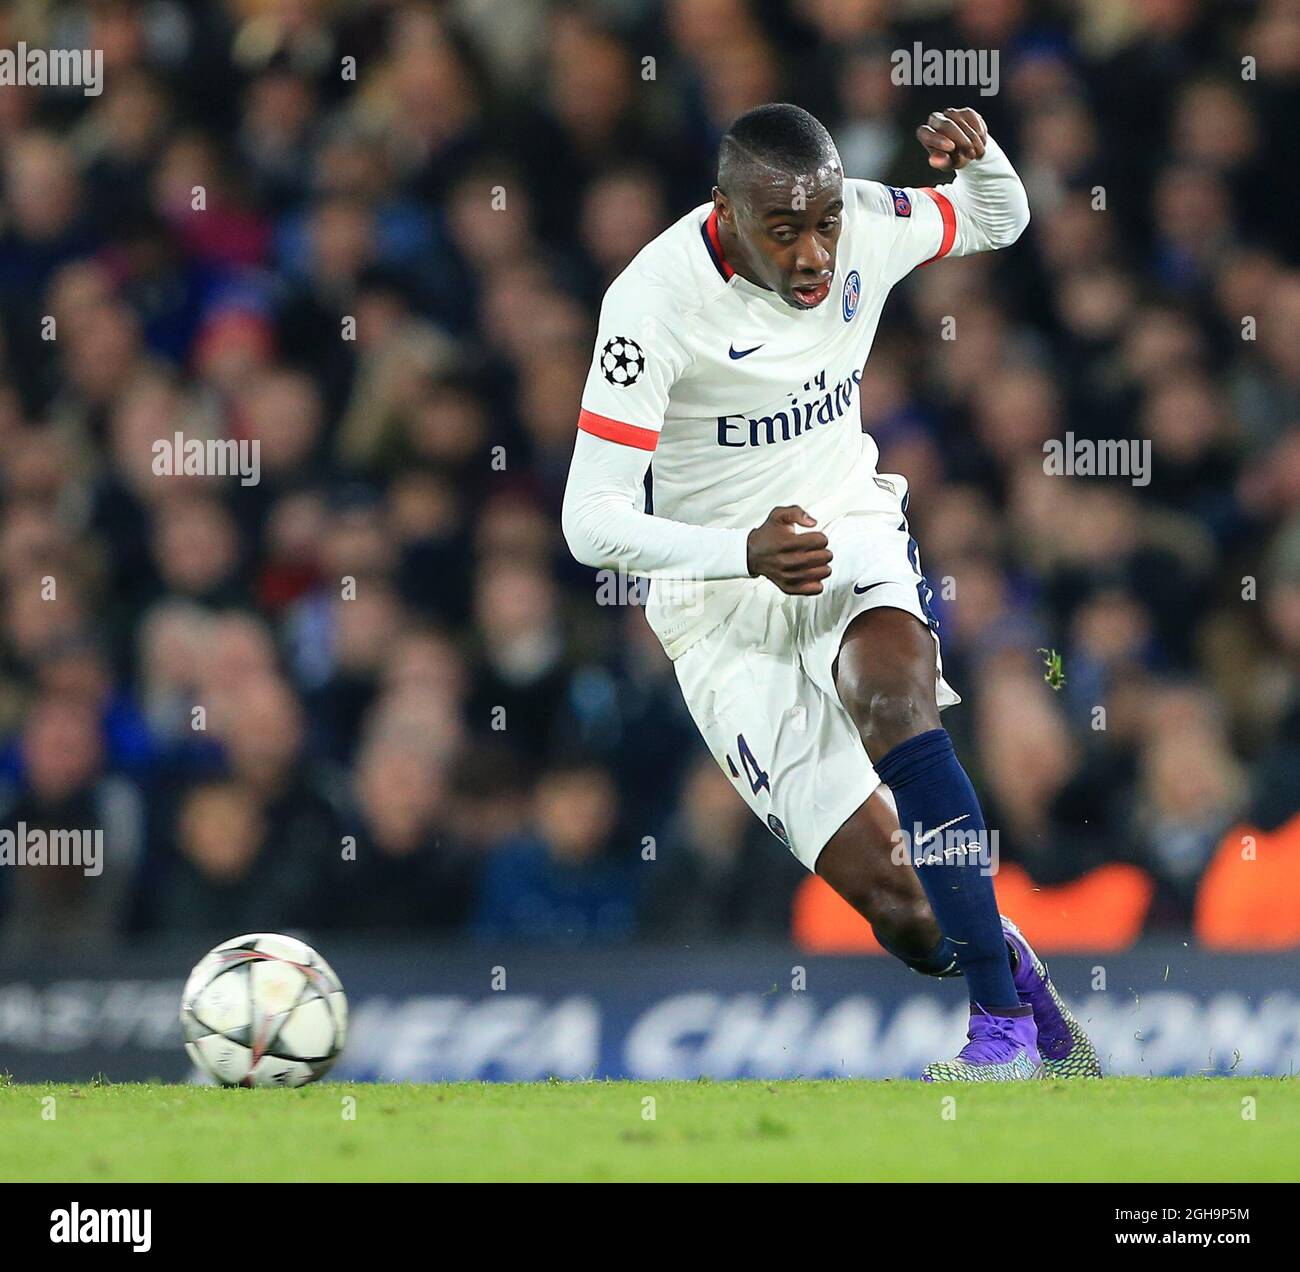 PGS's Blaise Matuidi in action during the UEFA Champions League match at Stamford Bridge.  Photo credit should read: David Klein/Sportimage via PA Images Stock Photo